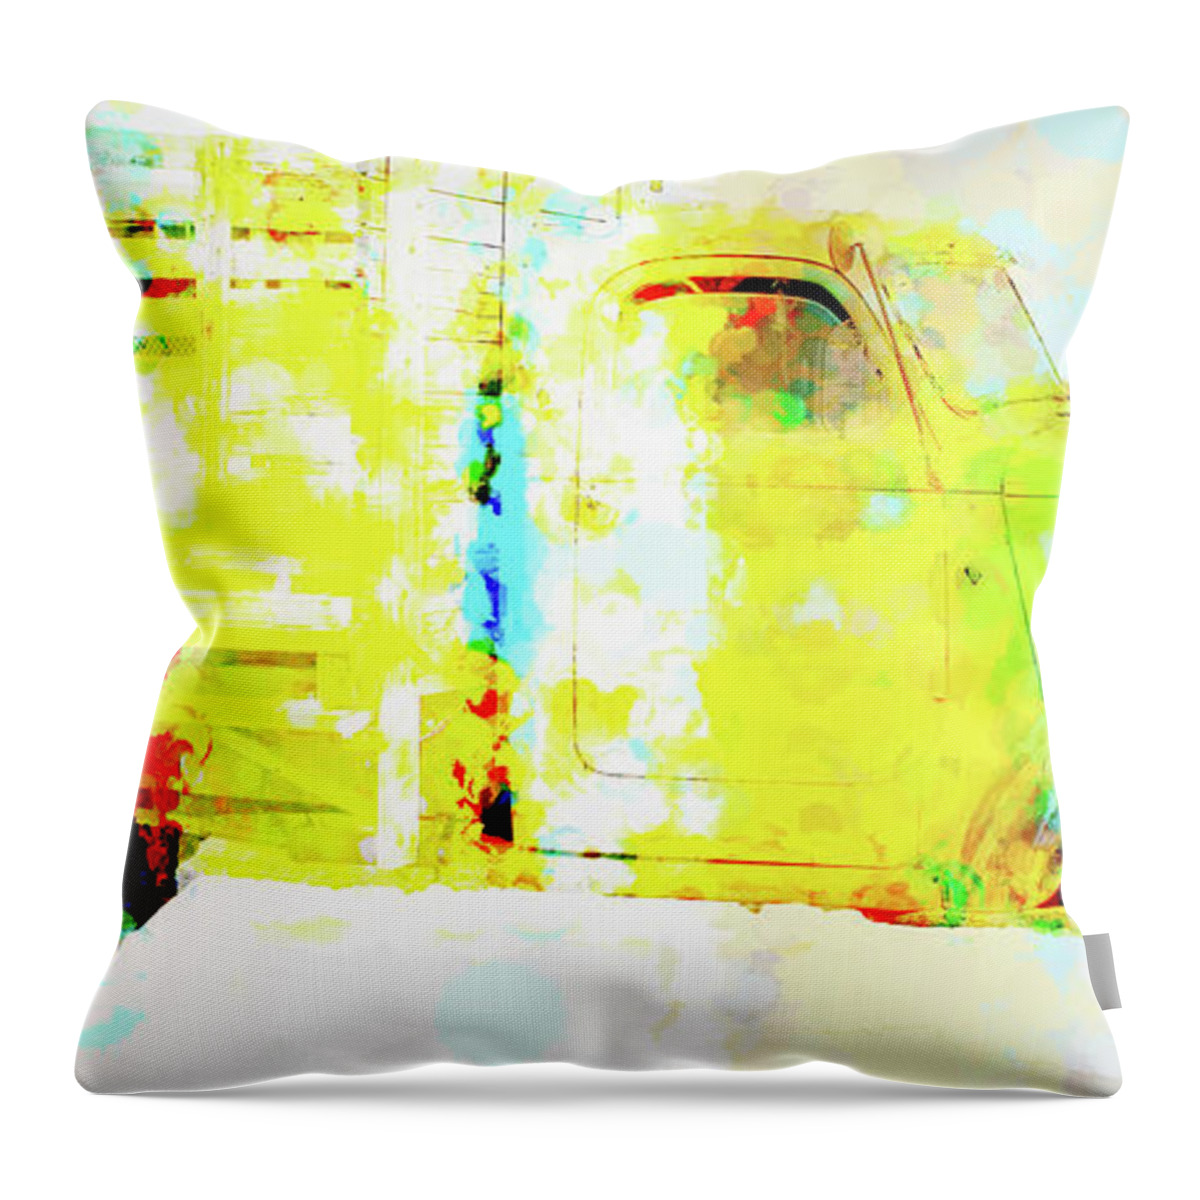 Truck Throw Pillow featuring the digital art Old Yellow truck by Cathy Anderson